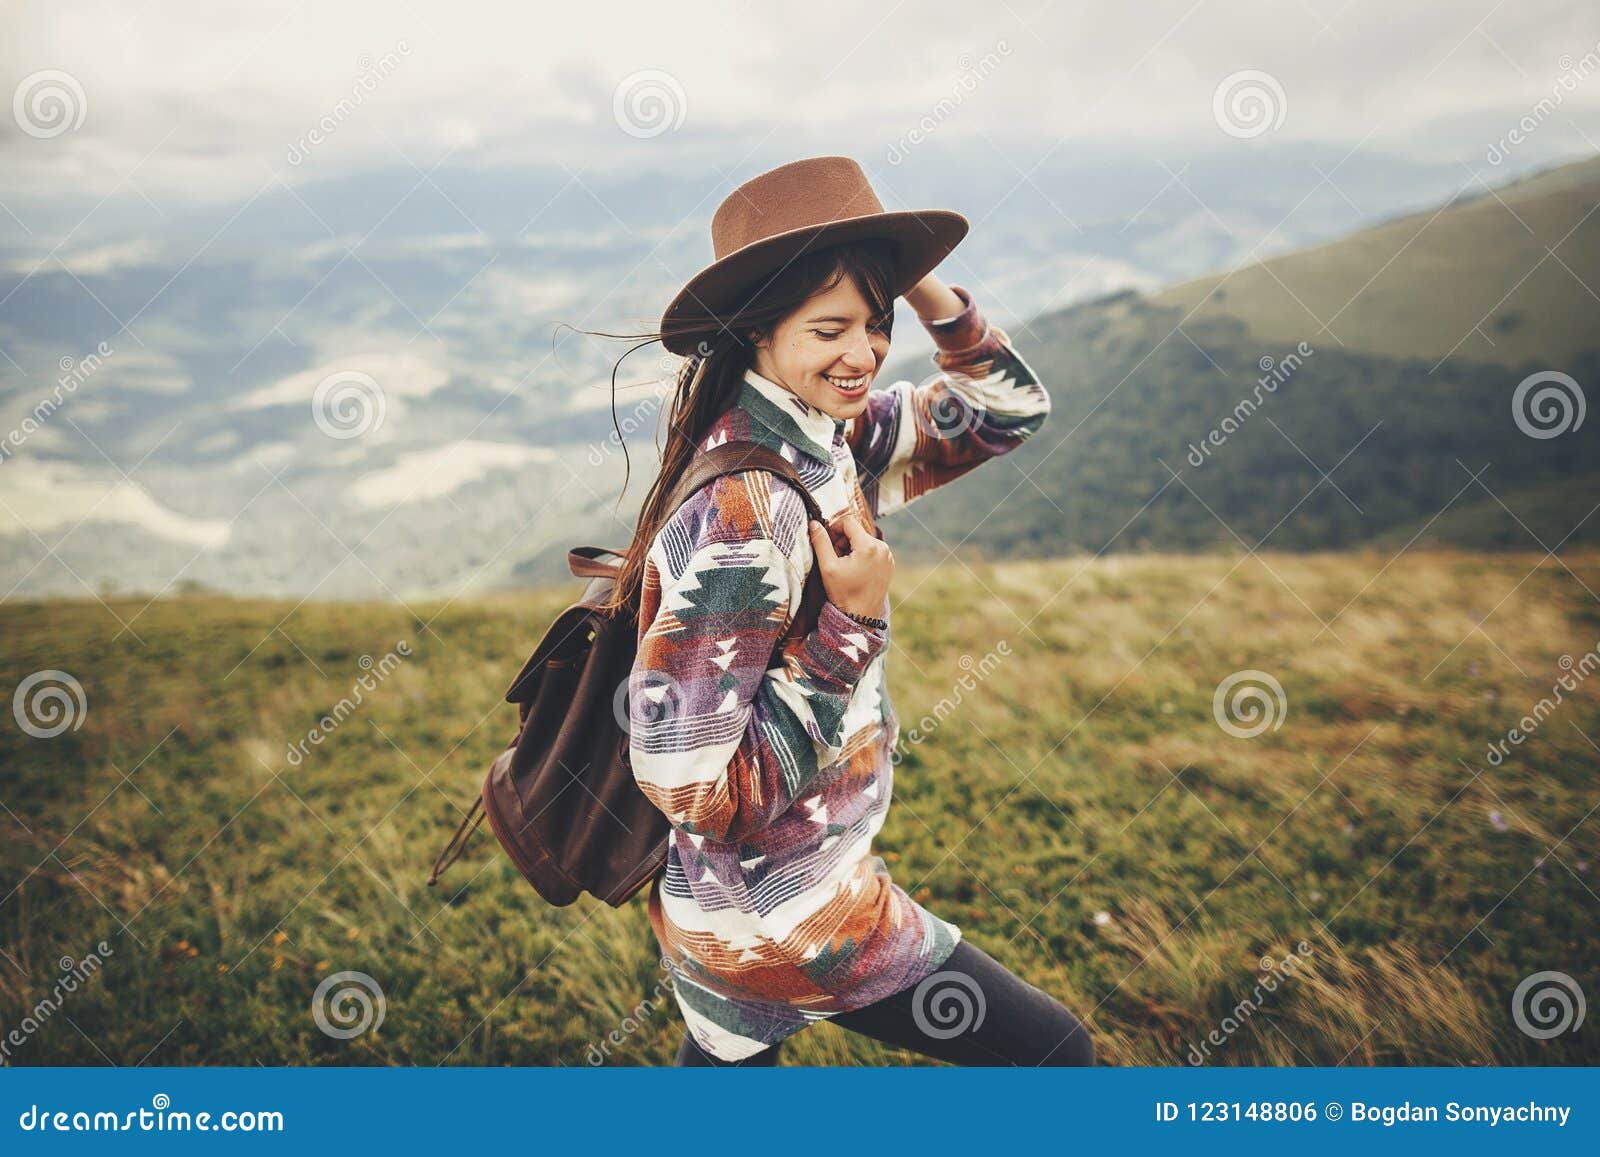 travel and wanderlust concept. stylish traveler hipster girl holding hat, with backpack and windy hair, walking in mountains in c